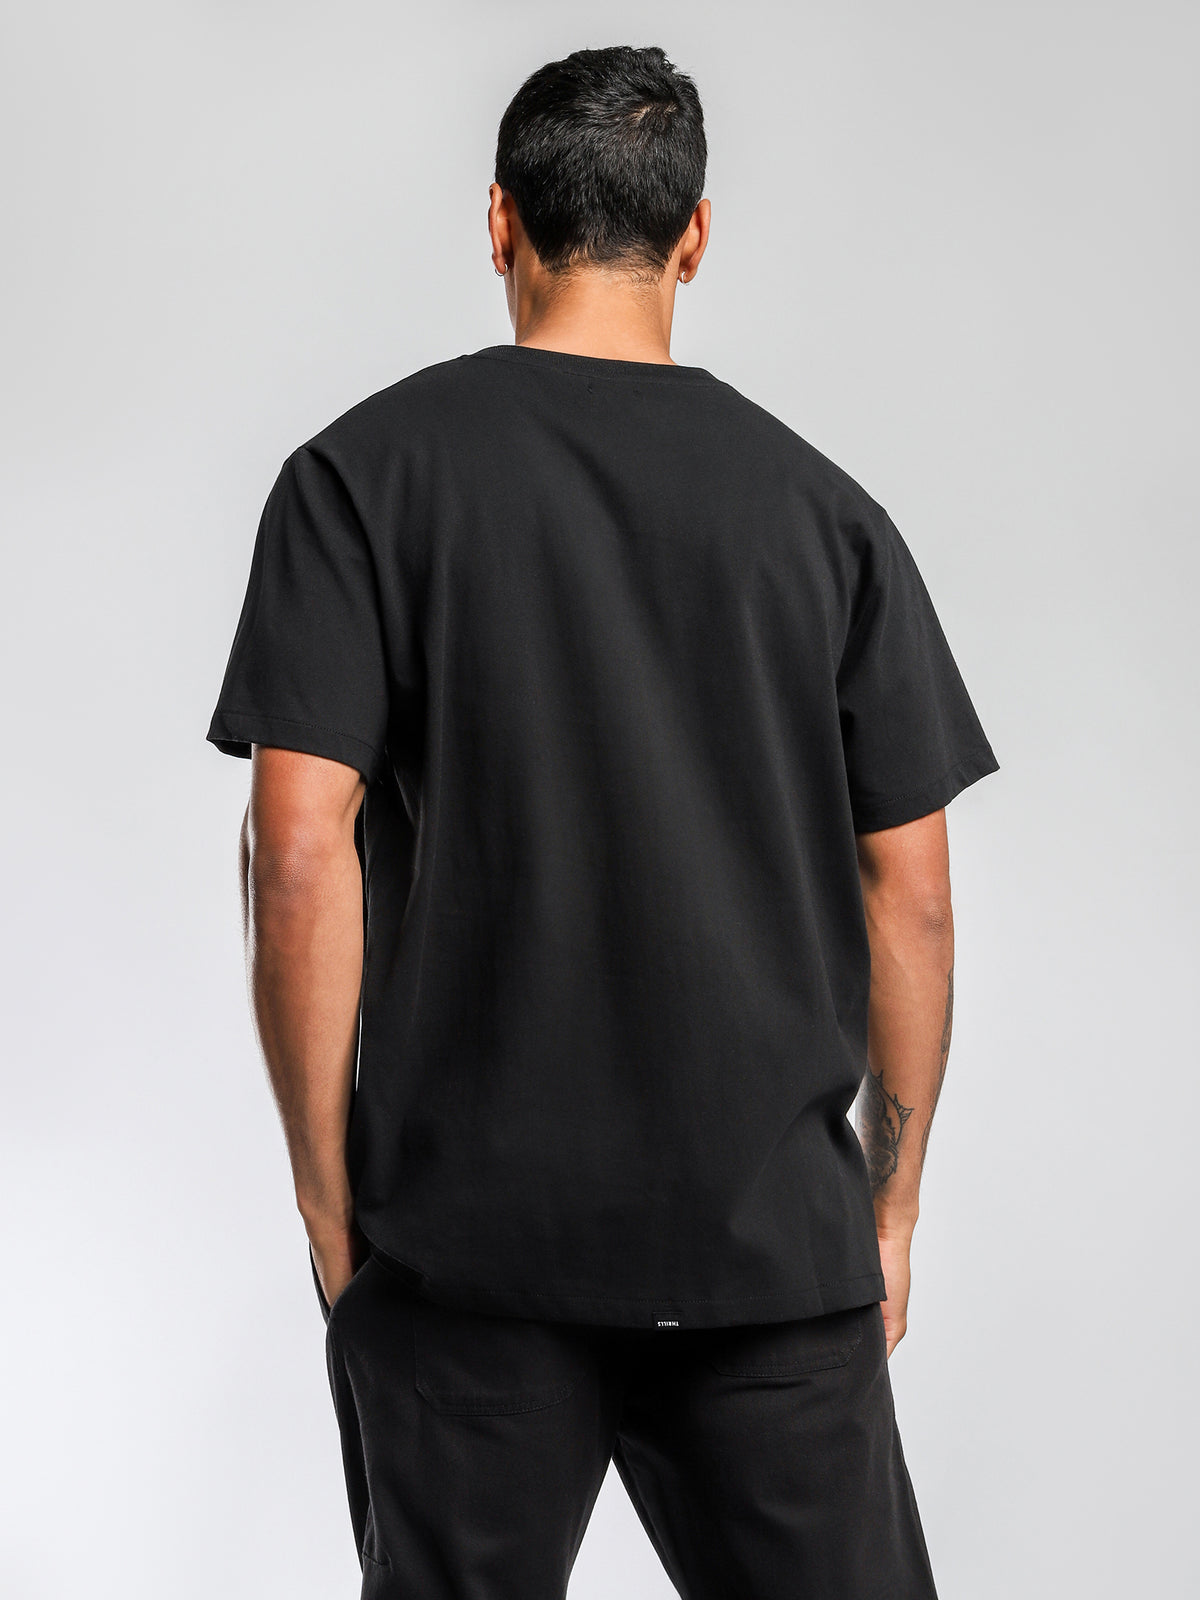 Trade Merch Fit T-Shirt in Black